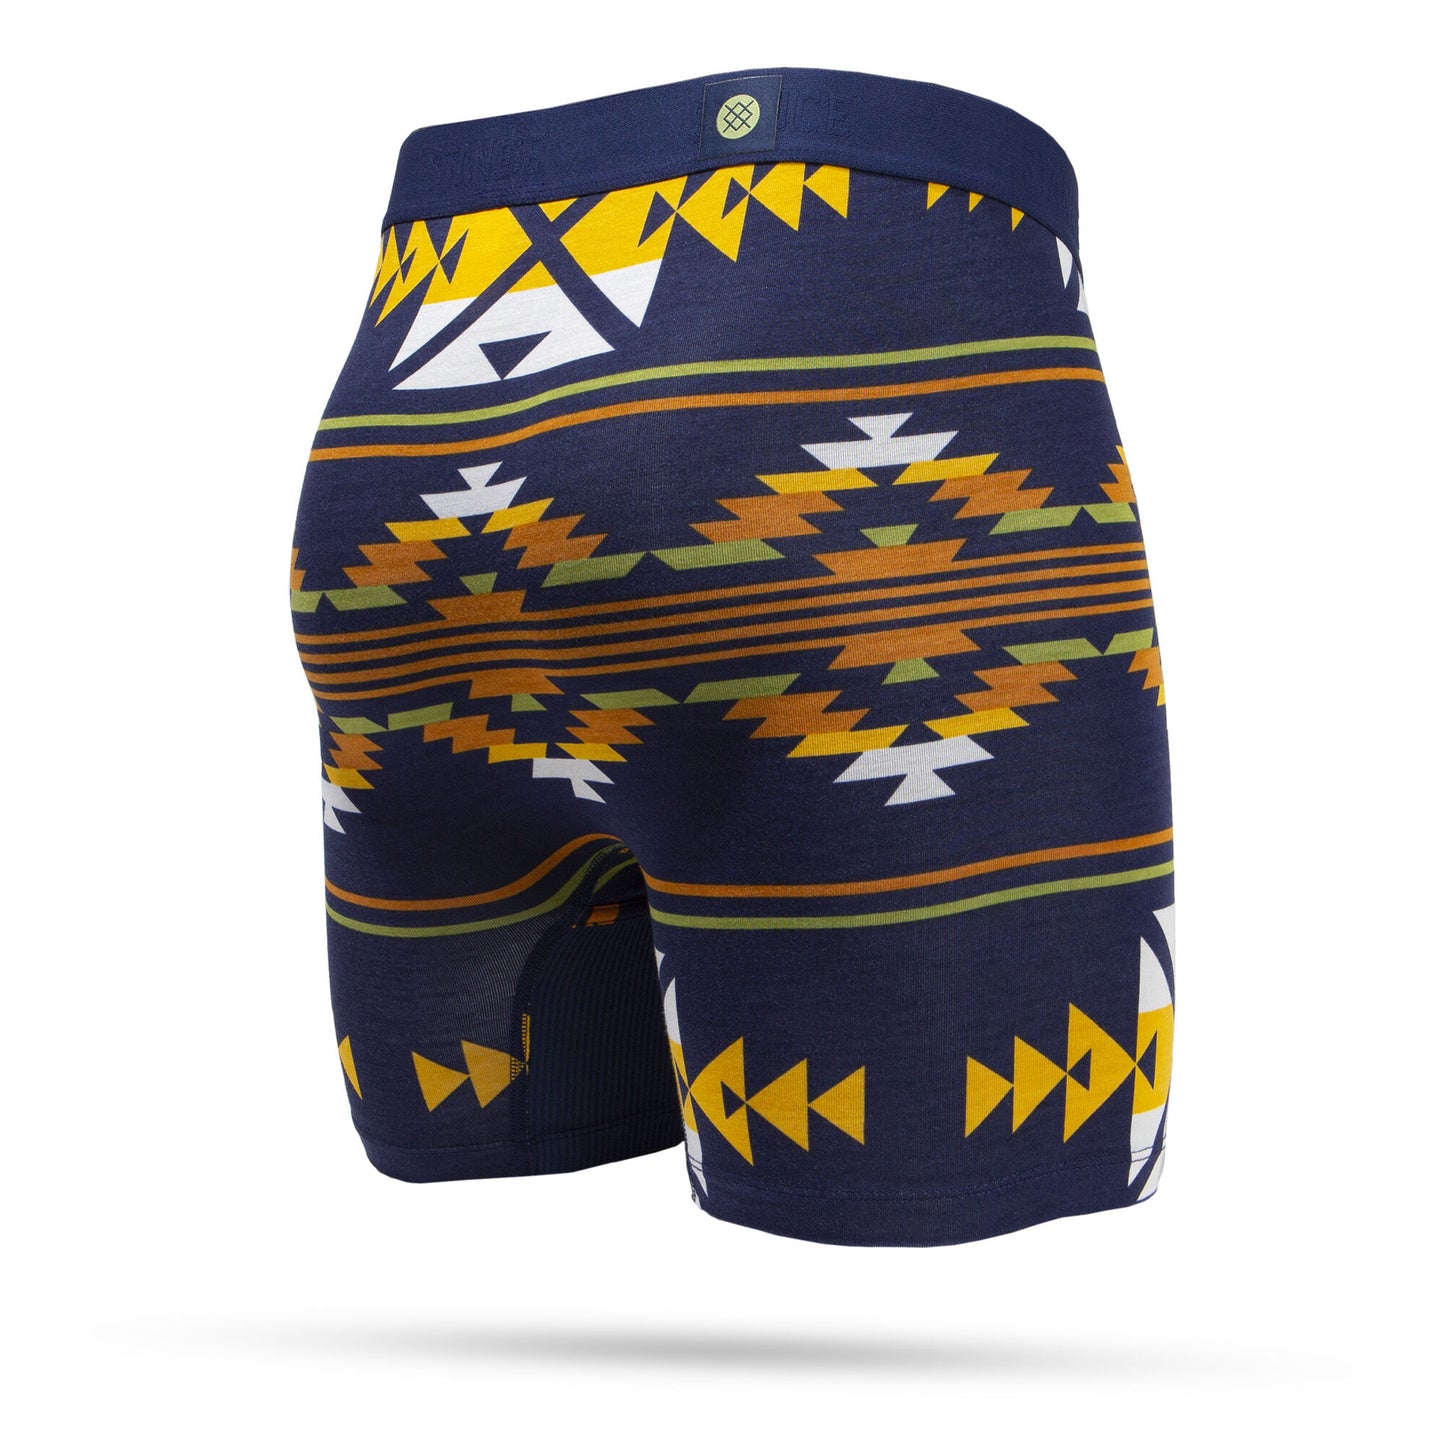 Guided Boxer Brief - Navy